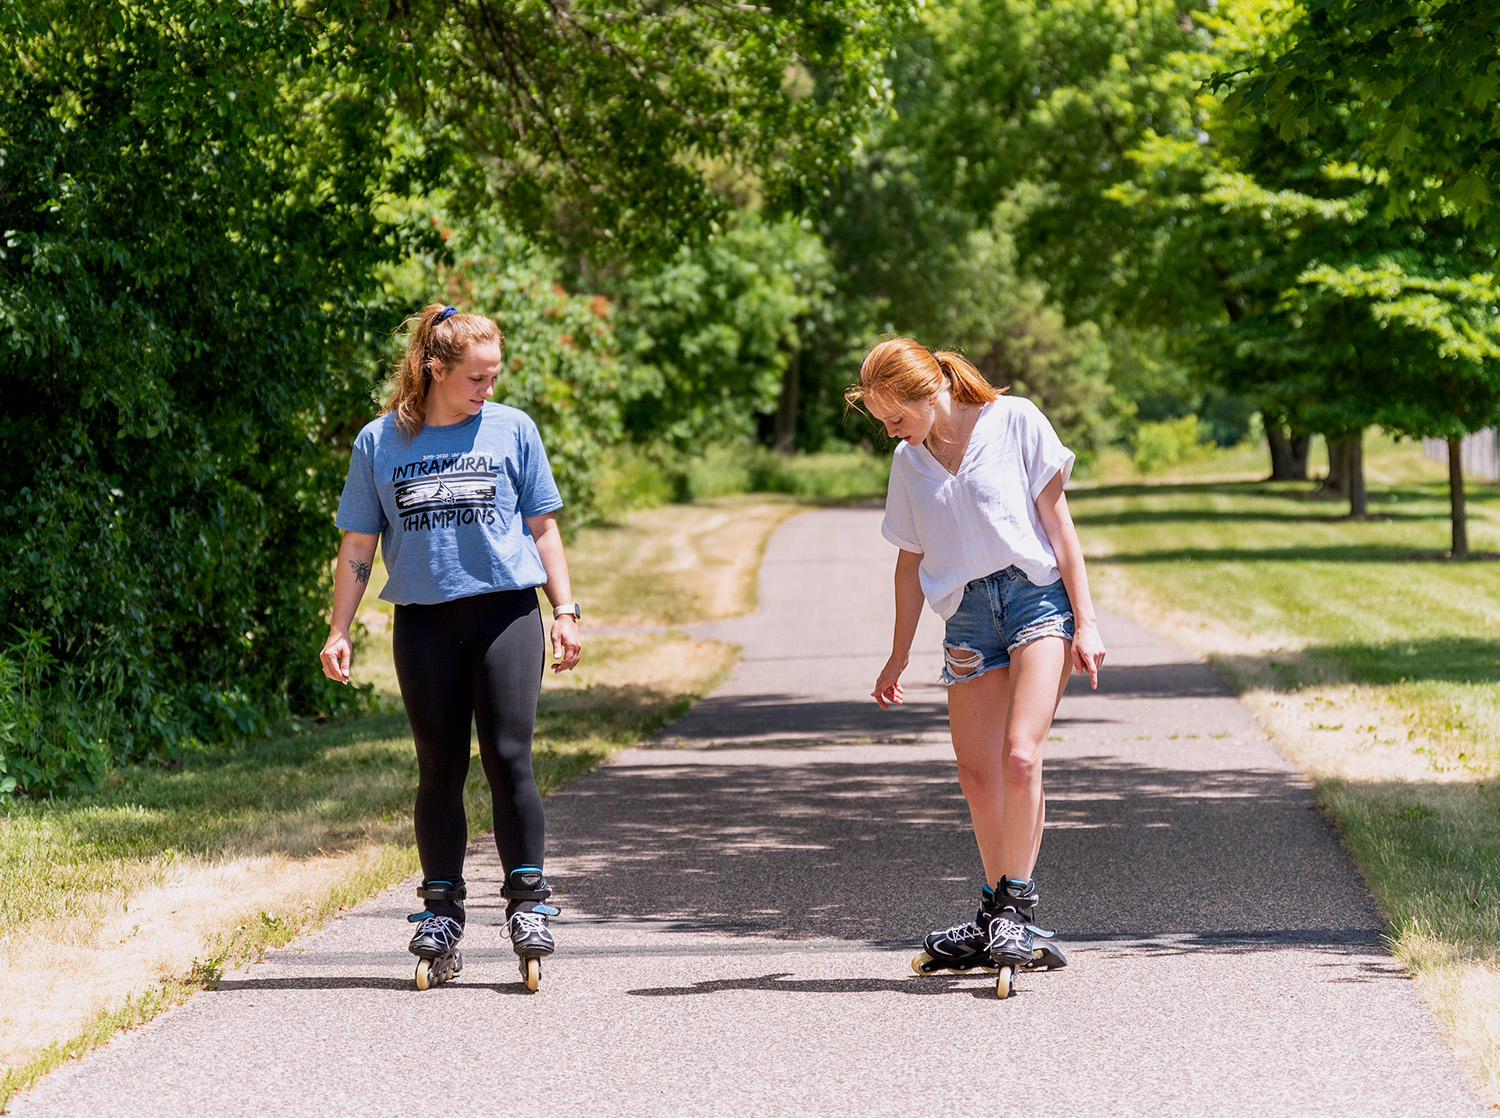 Two students rollerblade on Bluestem Path on campus